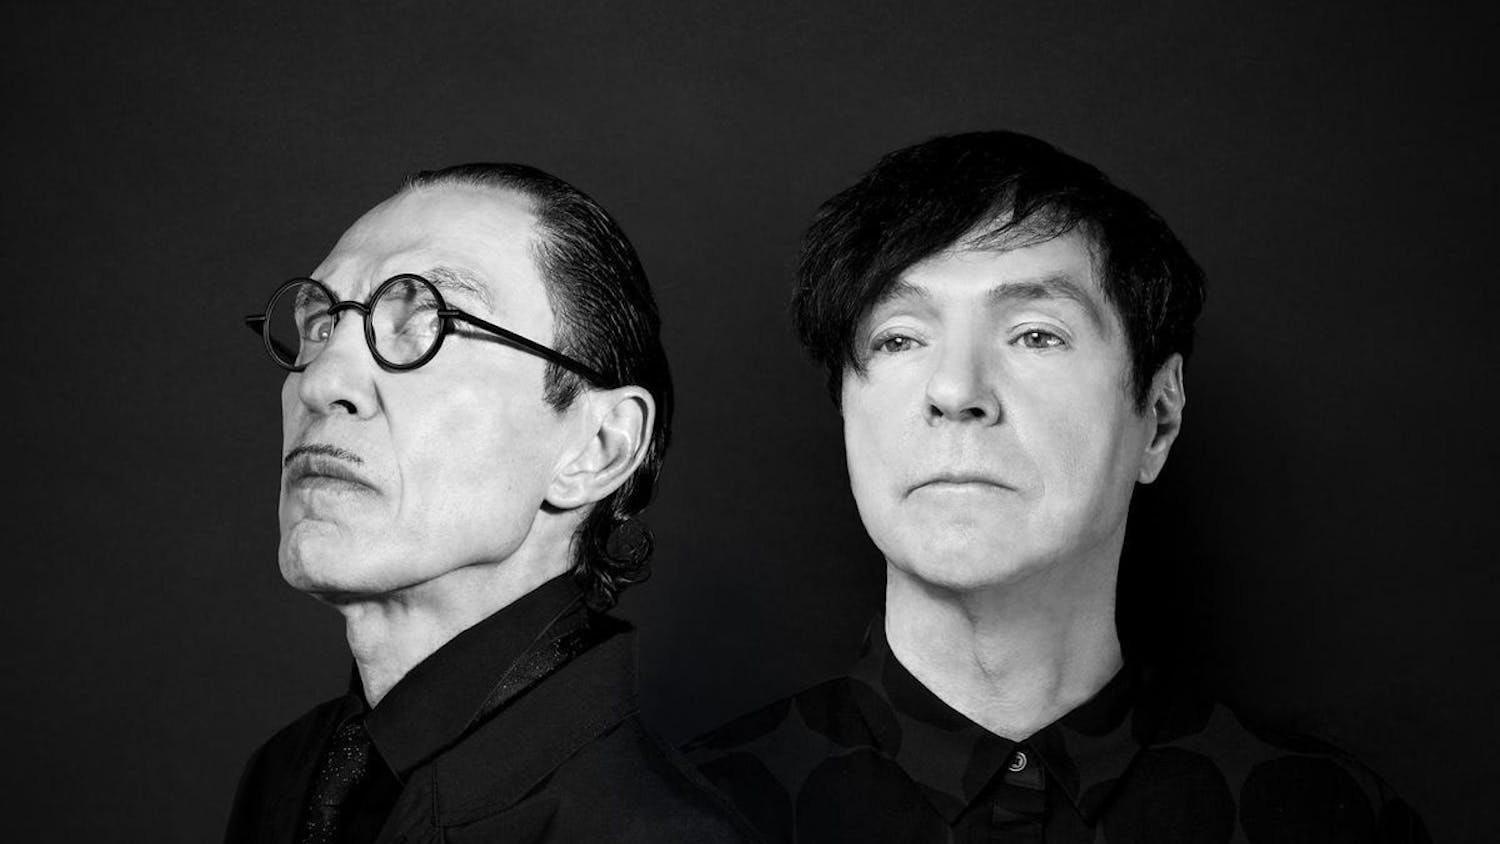 With a seemingly never-ending list of special guest stars, “The Sparks Brothers” gathers the most unlikely celebrities to showcase Ron and Russell Mael’s otherworldly 50-year career as the band Sparks. (Courtesy to The Alligator)